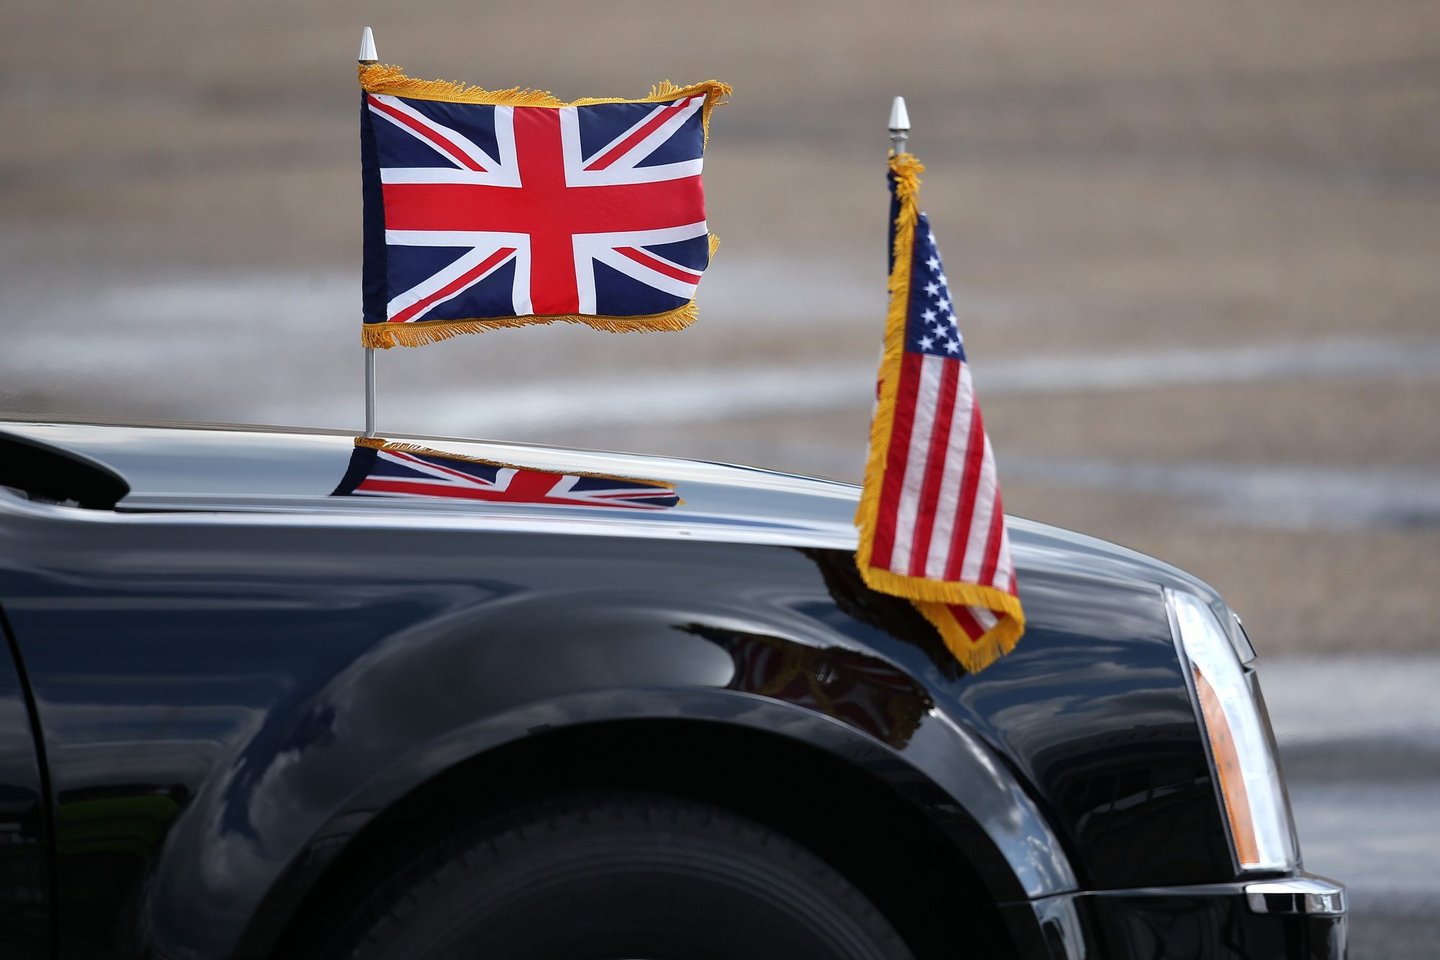 LONDON, ENGLAND - APRIL 24: The British and US flags fly from the bonnet of a car prior to the departure of US President Barack Obama at Stansted Airport, on April 24, 2016 in London, England. Mr Obama is to visit Hanover in Germany to hold talks with German Chancellor Angela Merkel before returning to the US. (Photo by Dan Kitwood/Getty Images)